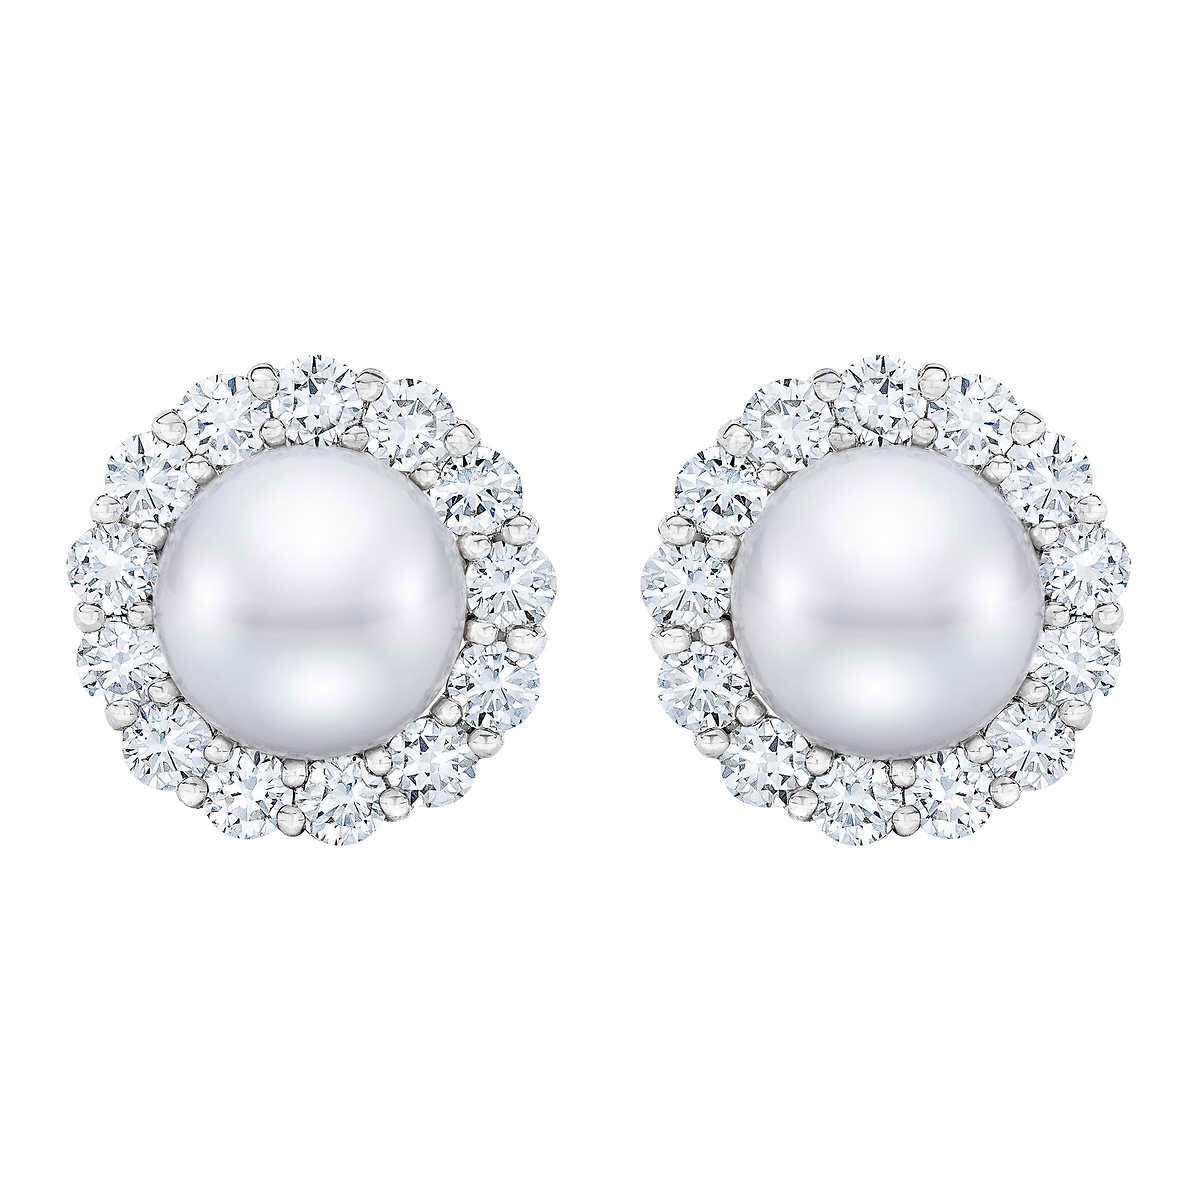 9-10mm Cultured Freshwater White Pearl & 1.95ctw Diamond Earrings, 14ct White Gold